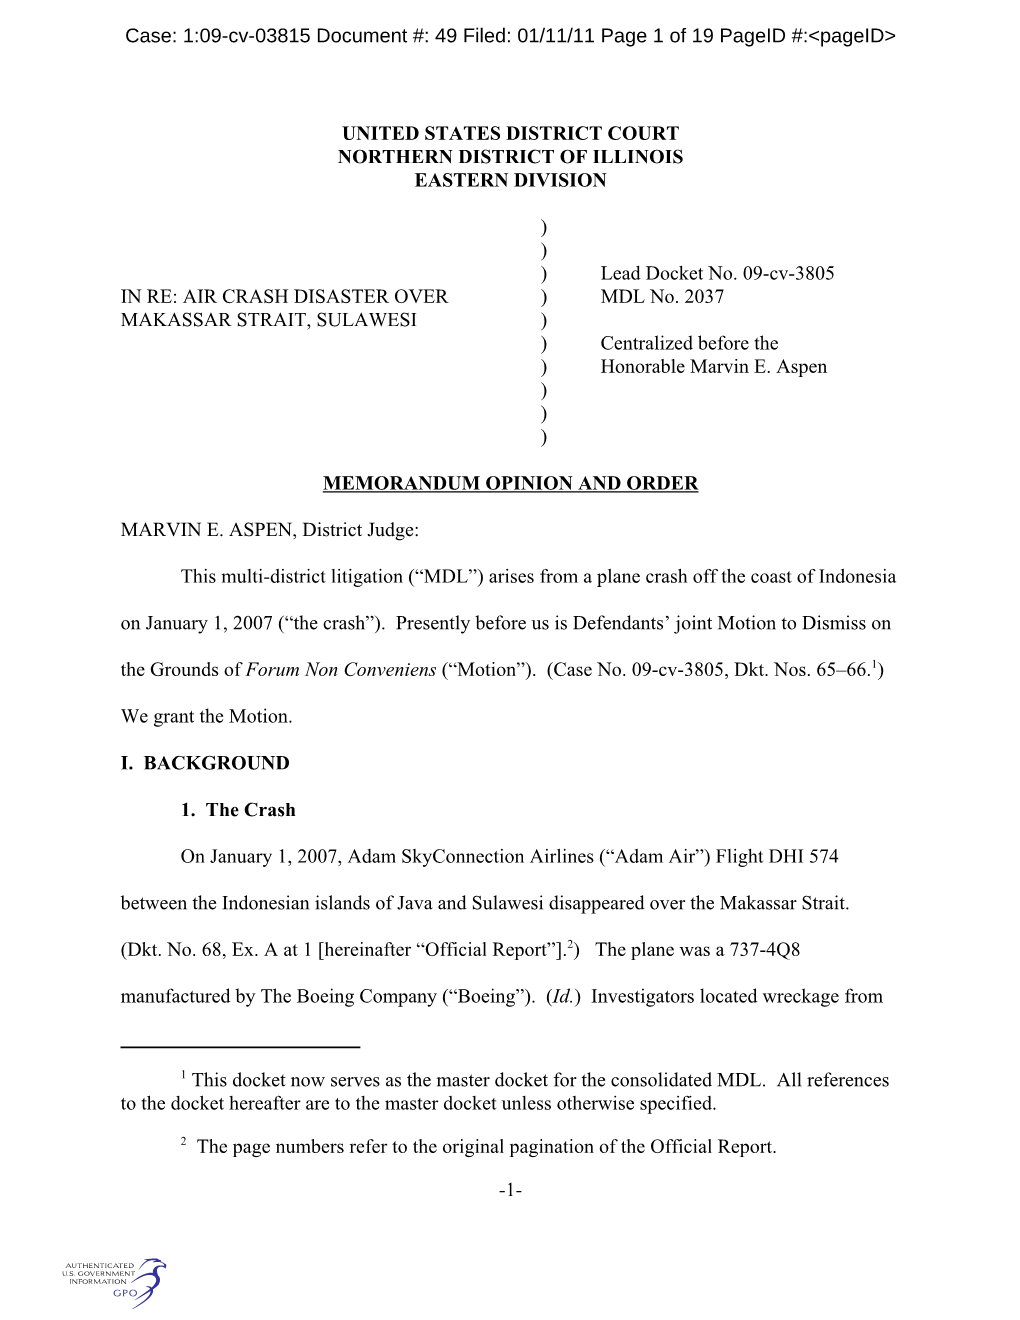 UNITED STATES DISTRICT COURT NORTHERN DISTRICT of ILLINOIS EASTERN DIVISION ) ) ) Lead Docket No. 09-Cv-3805 in RE: AIR CRASH DI